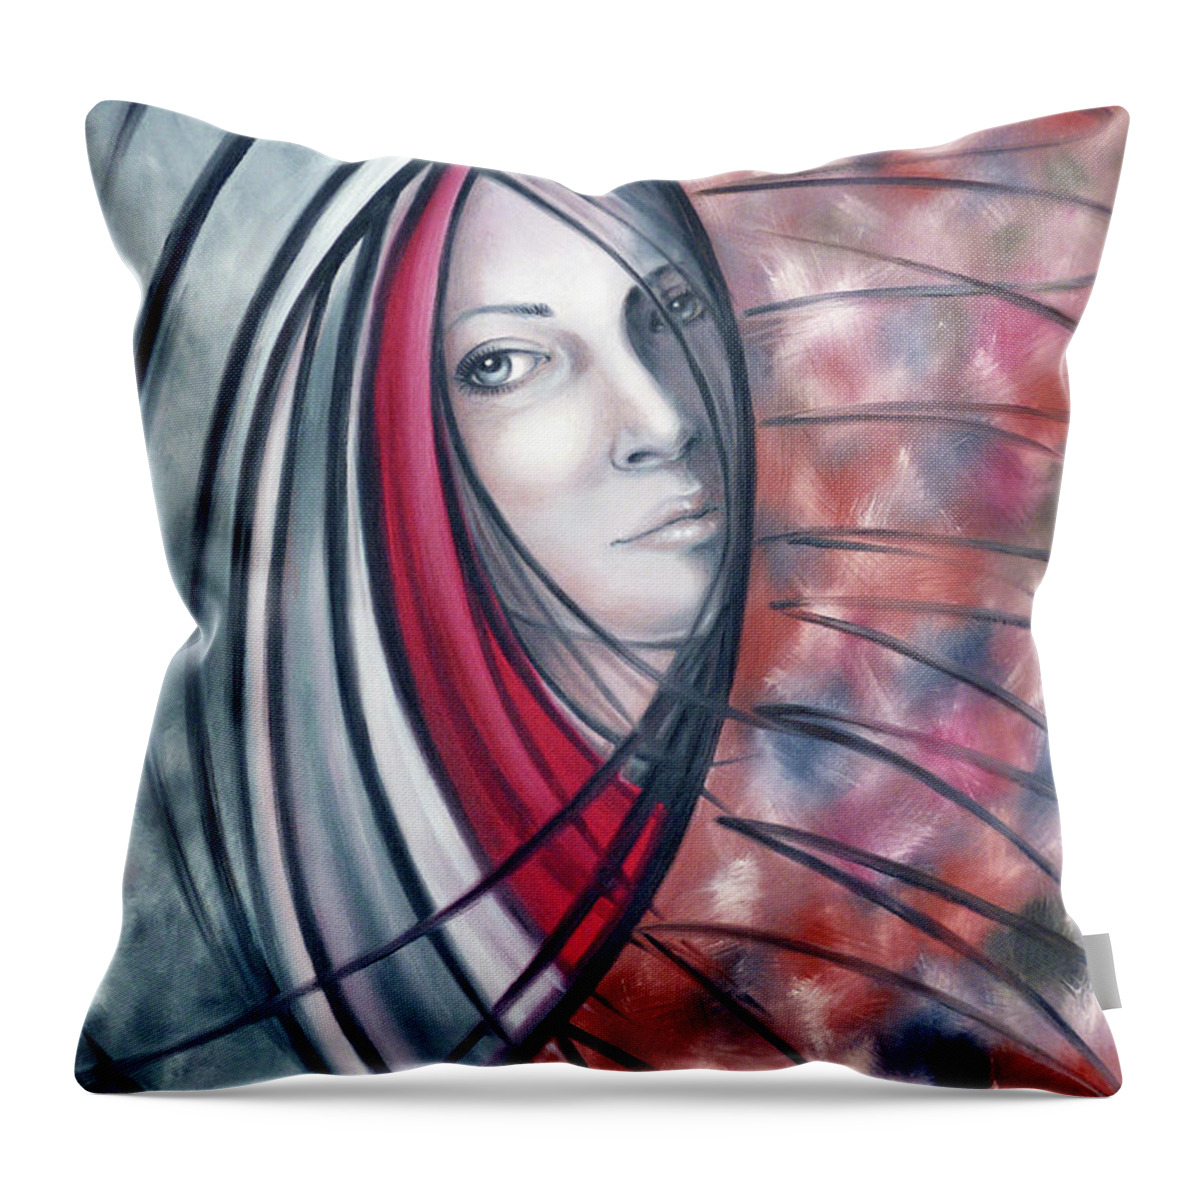 Original Throw Pillow featuring the painting Catch Me If You Can 080908 #3 by Selena Boron